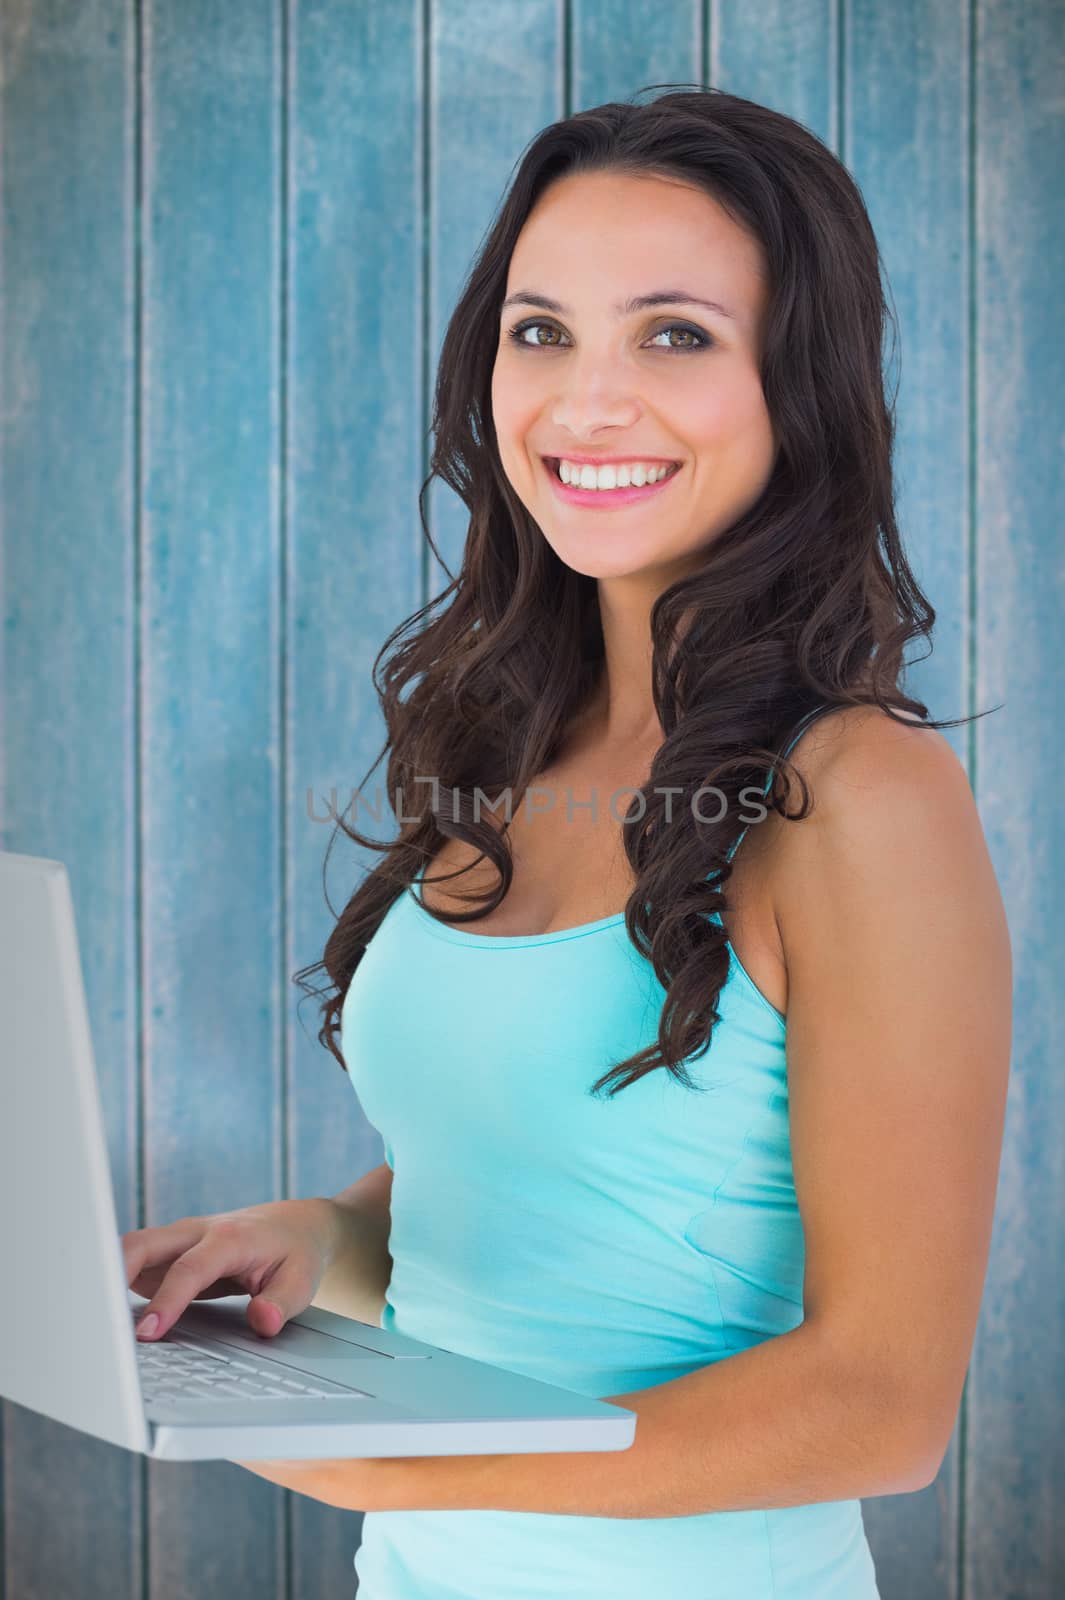 Composite image of casual brunette using her laptop by Wavebreakmedia